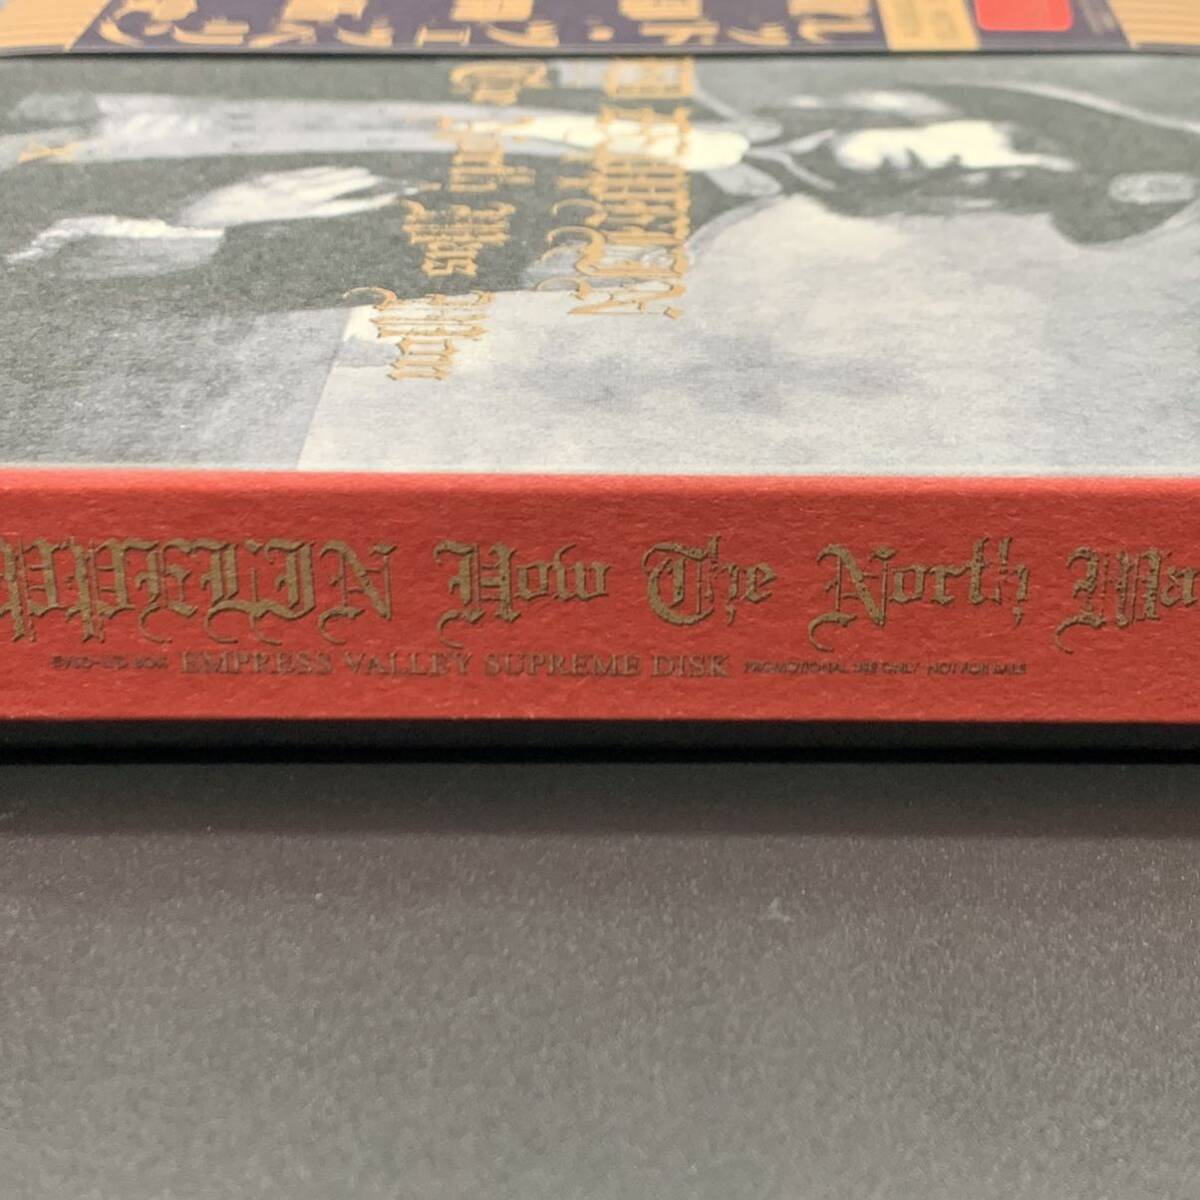 LED ZEPPELIN / HOW THE NORTH WAS WON「北部開拓史」(8CD BOX)の画像6